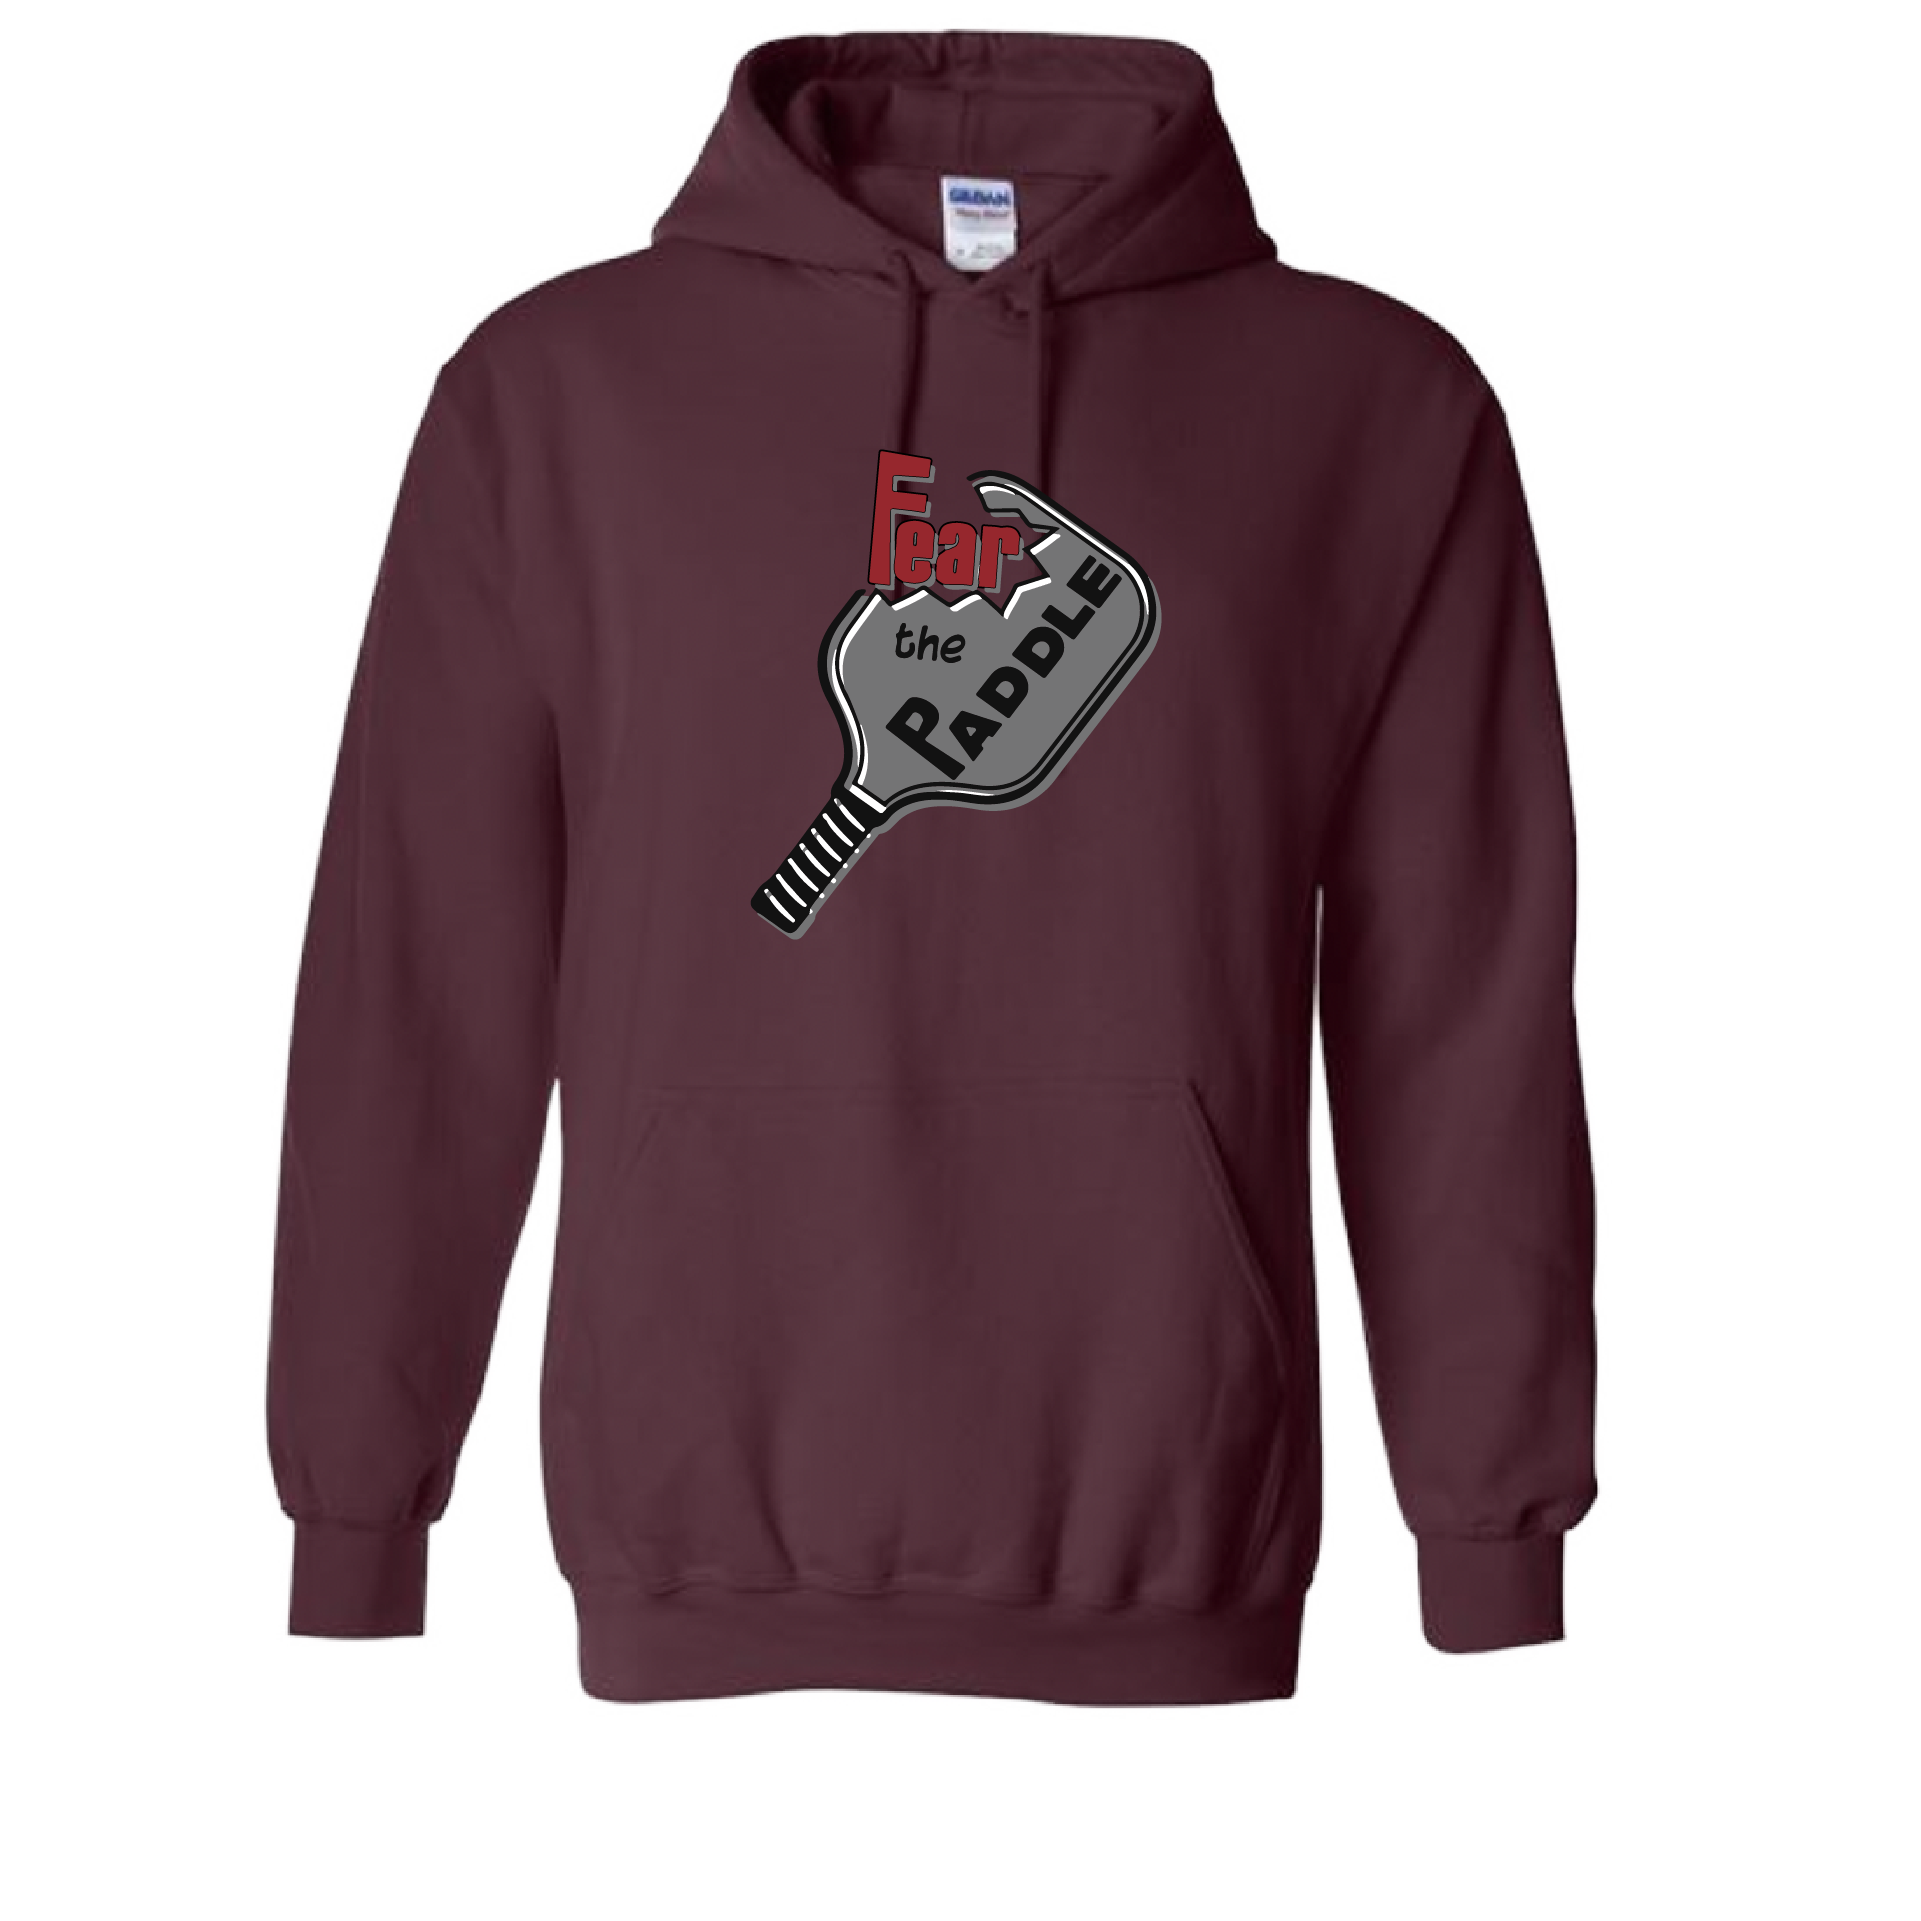 Pickleball Design: Fear the Paddle  Unisex Hooded Sweatshirt: Moisture-wicking, double-lined hood, front pouch pocket.  This unisex hooded sweatshirt is ultra comfortable and soft. Stay warm on the Pickleball courts while being that hit with this one of kind design.